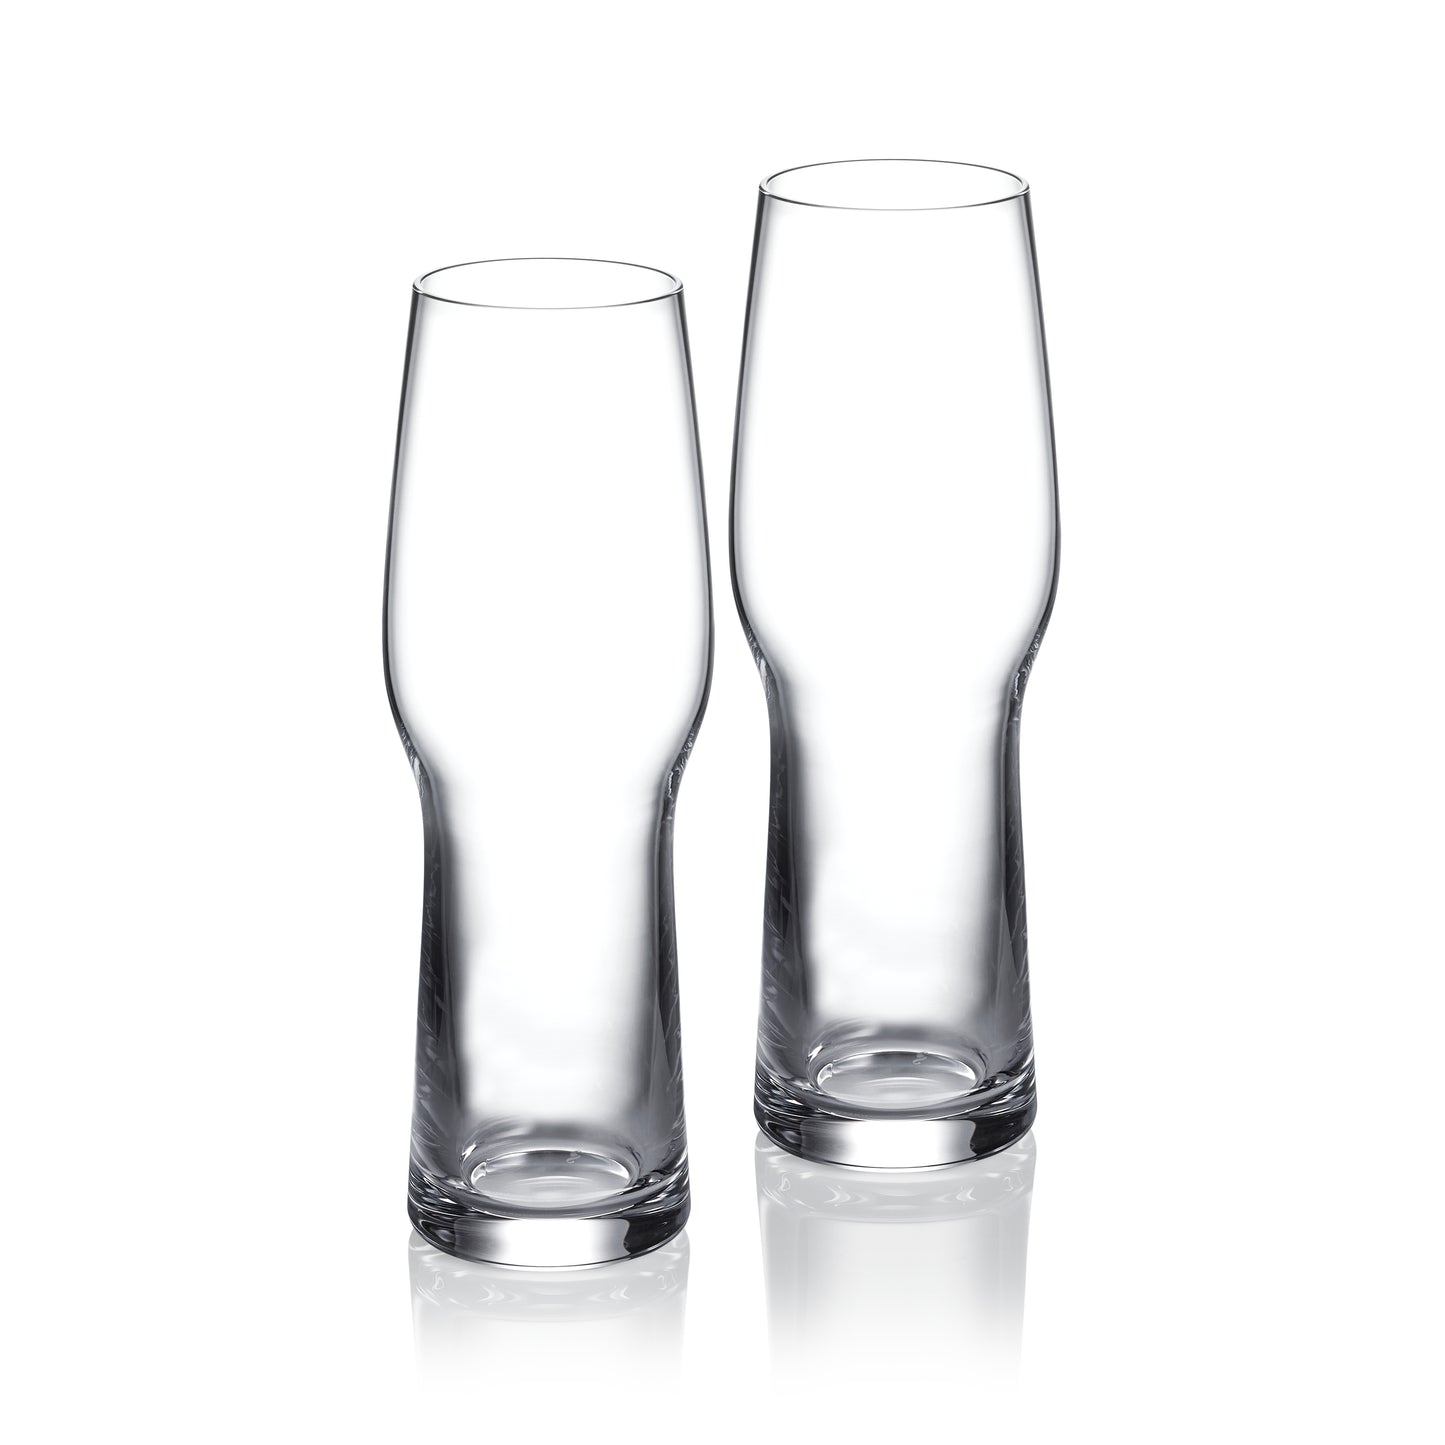 Waterford Craft Brew Pilsner Glass 650ml, Set of 2